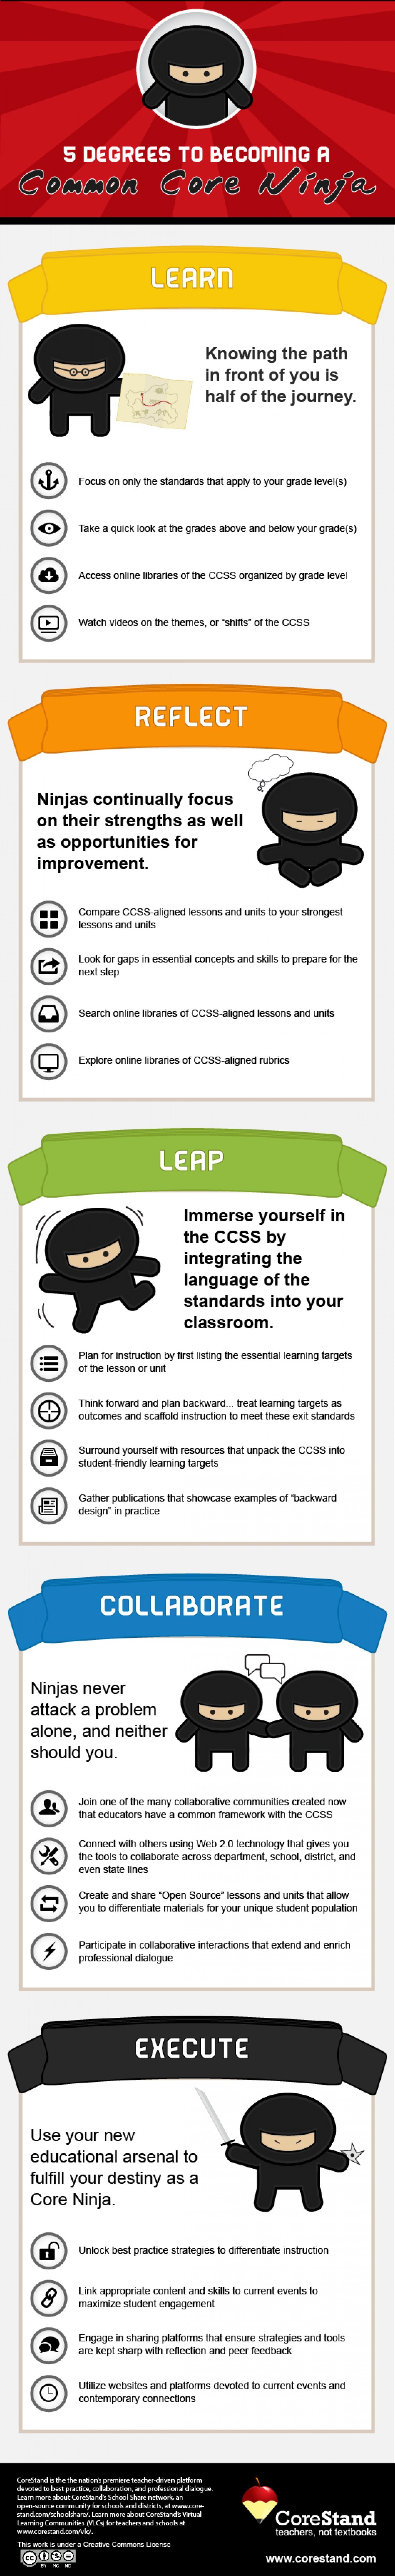 How to Become a Common Core Ninja Infographic